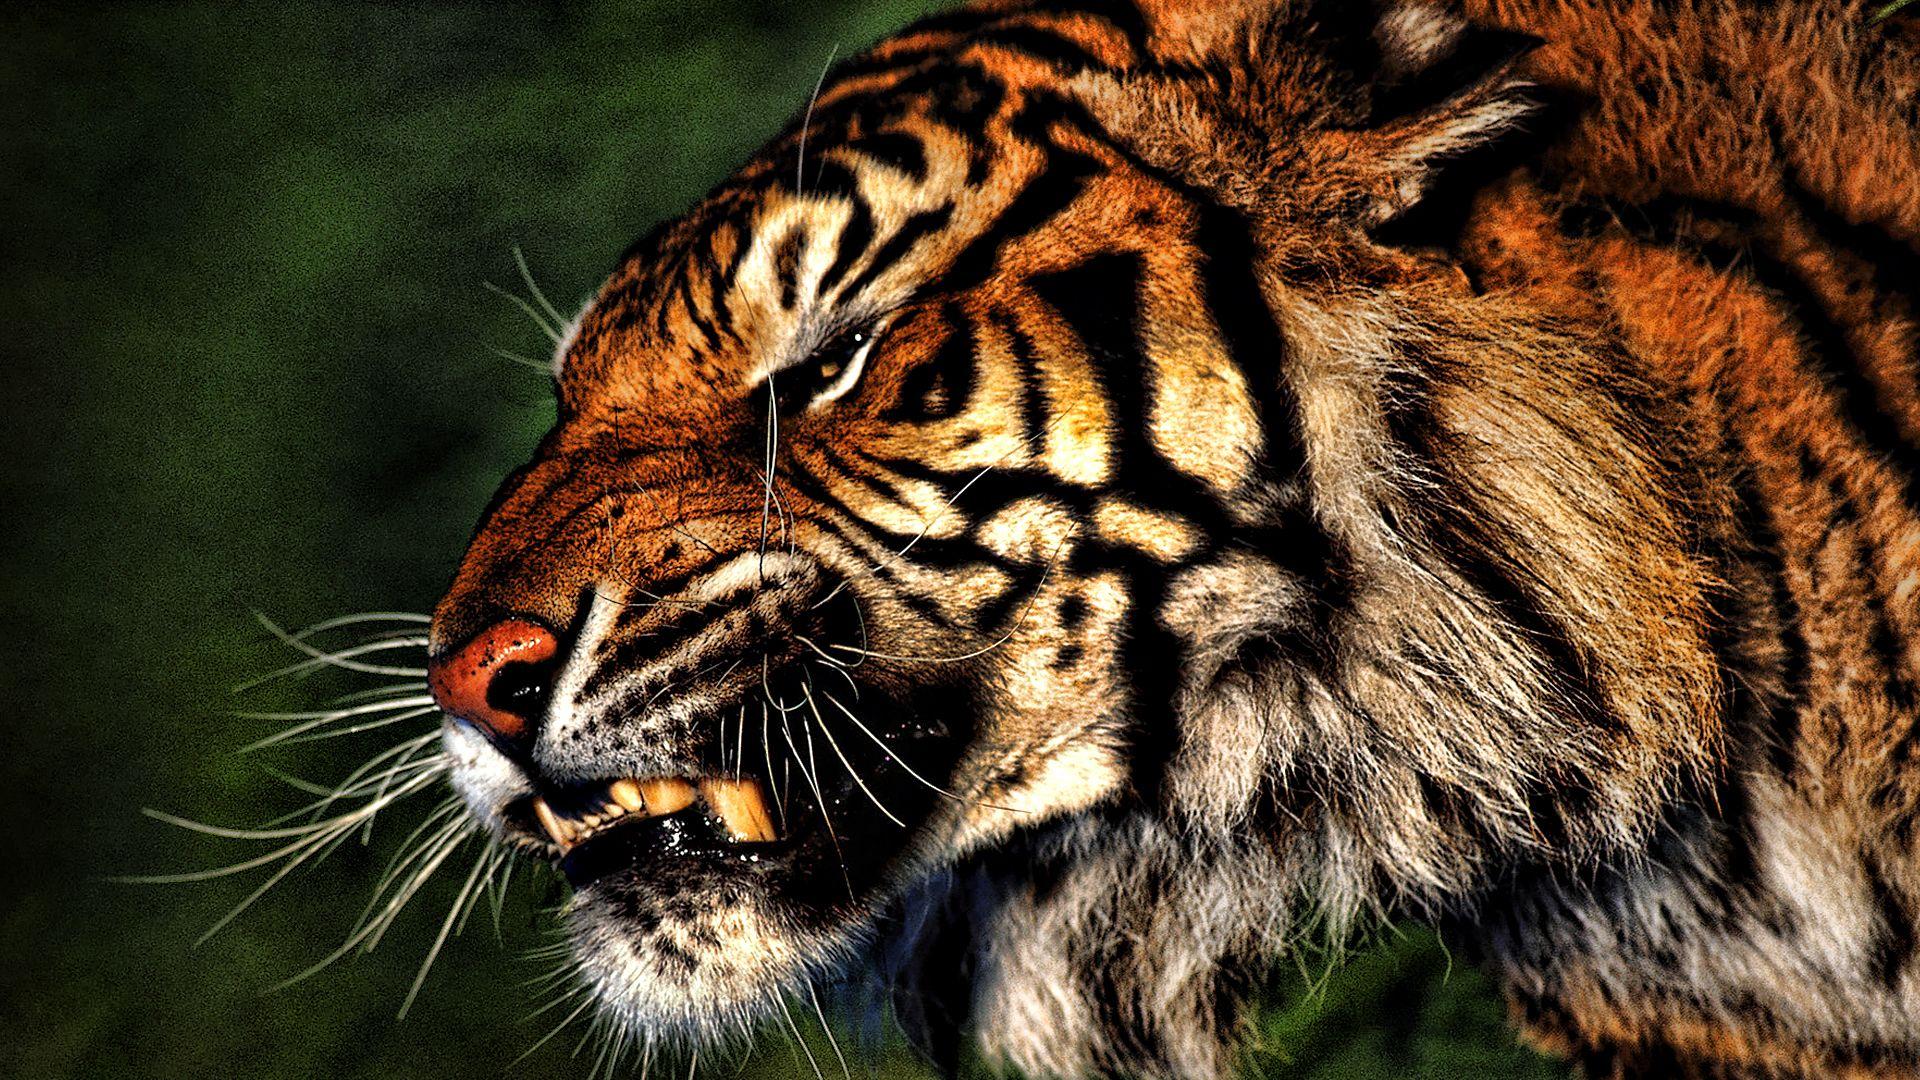 Free Angry Bengal Tiger Wallpaper Desktop Background For Wallpaper Idea